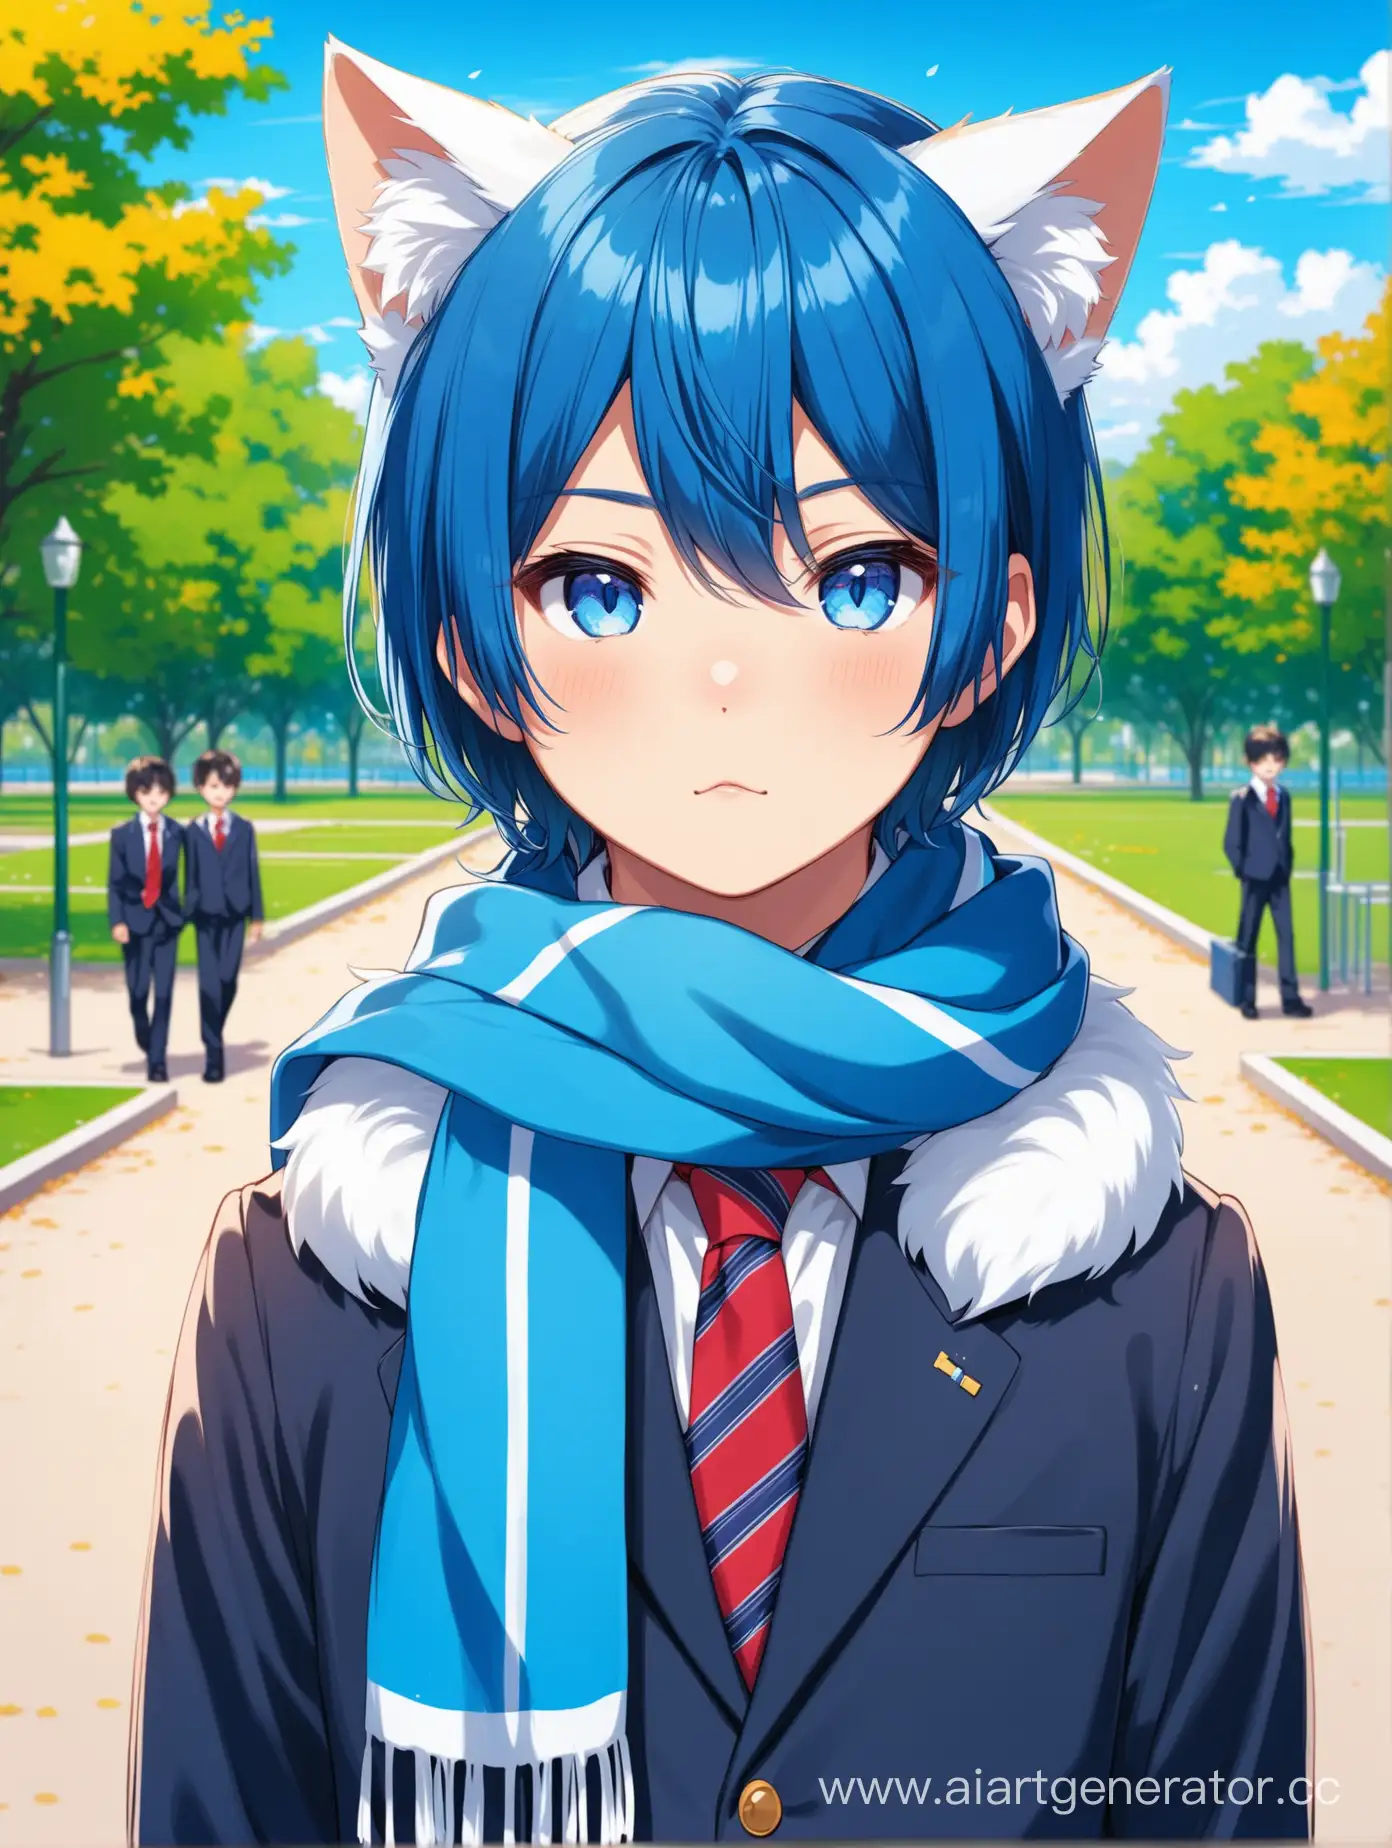 Stylish-Teenage-Cat-with-White-Fur-and-Blue-Bob-Hair-in-Park-Setting